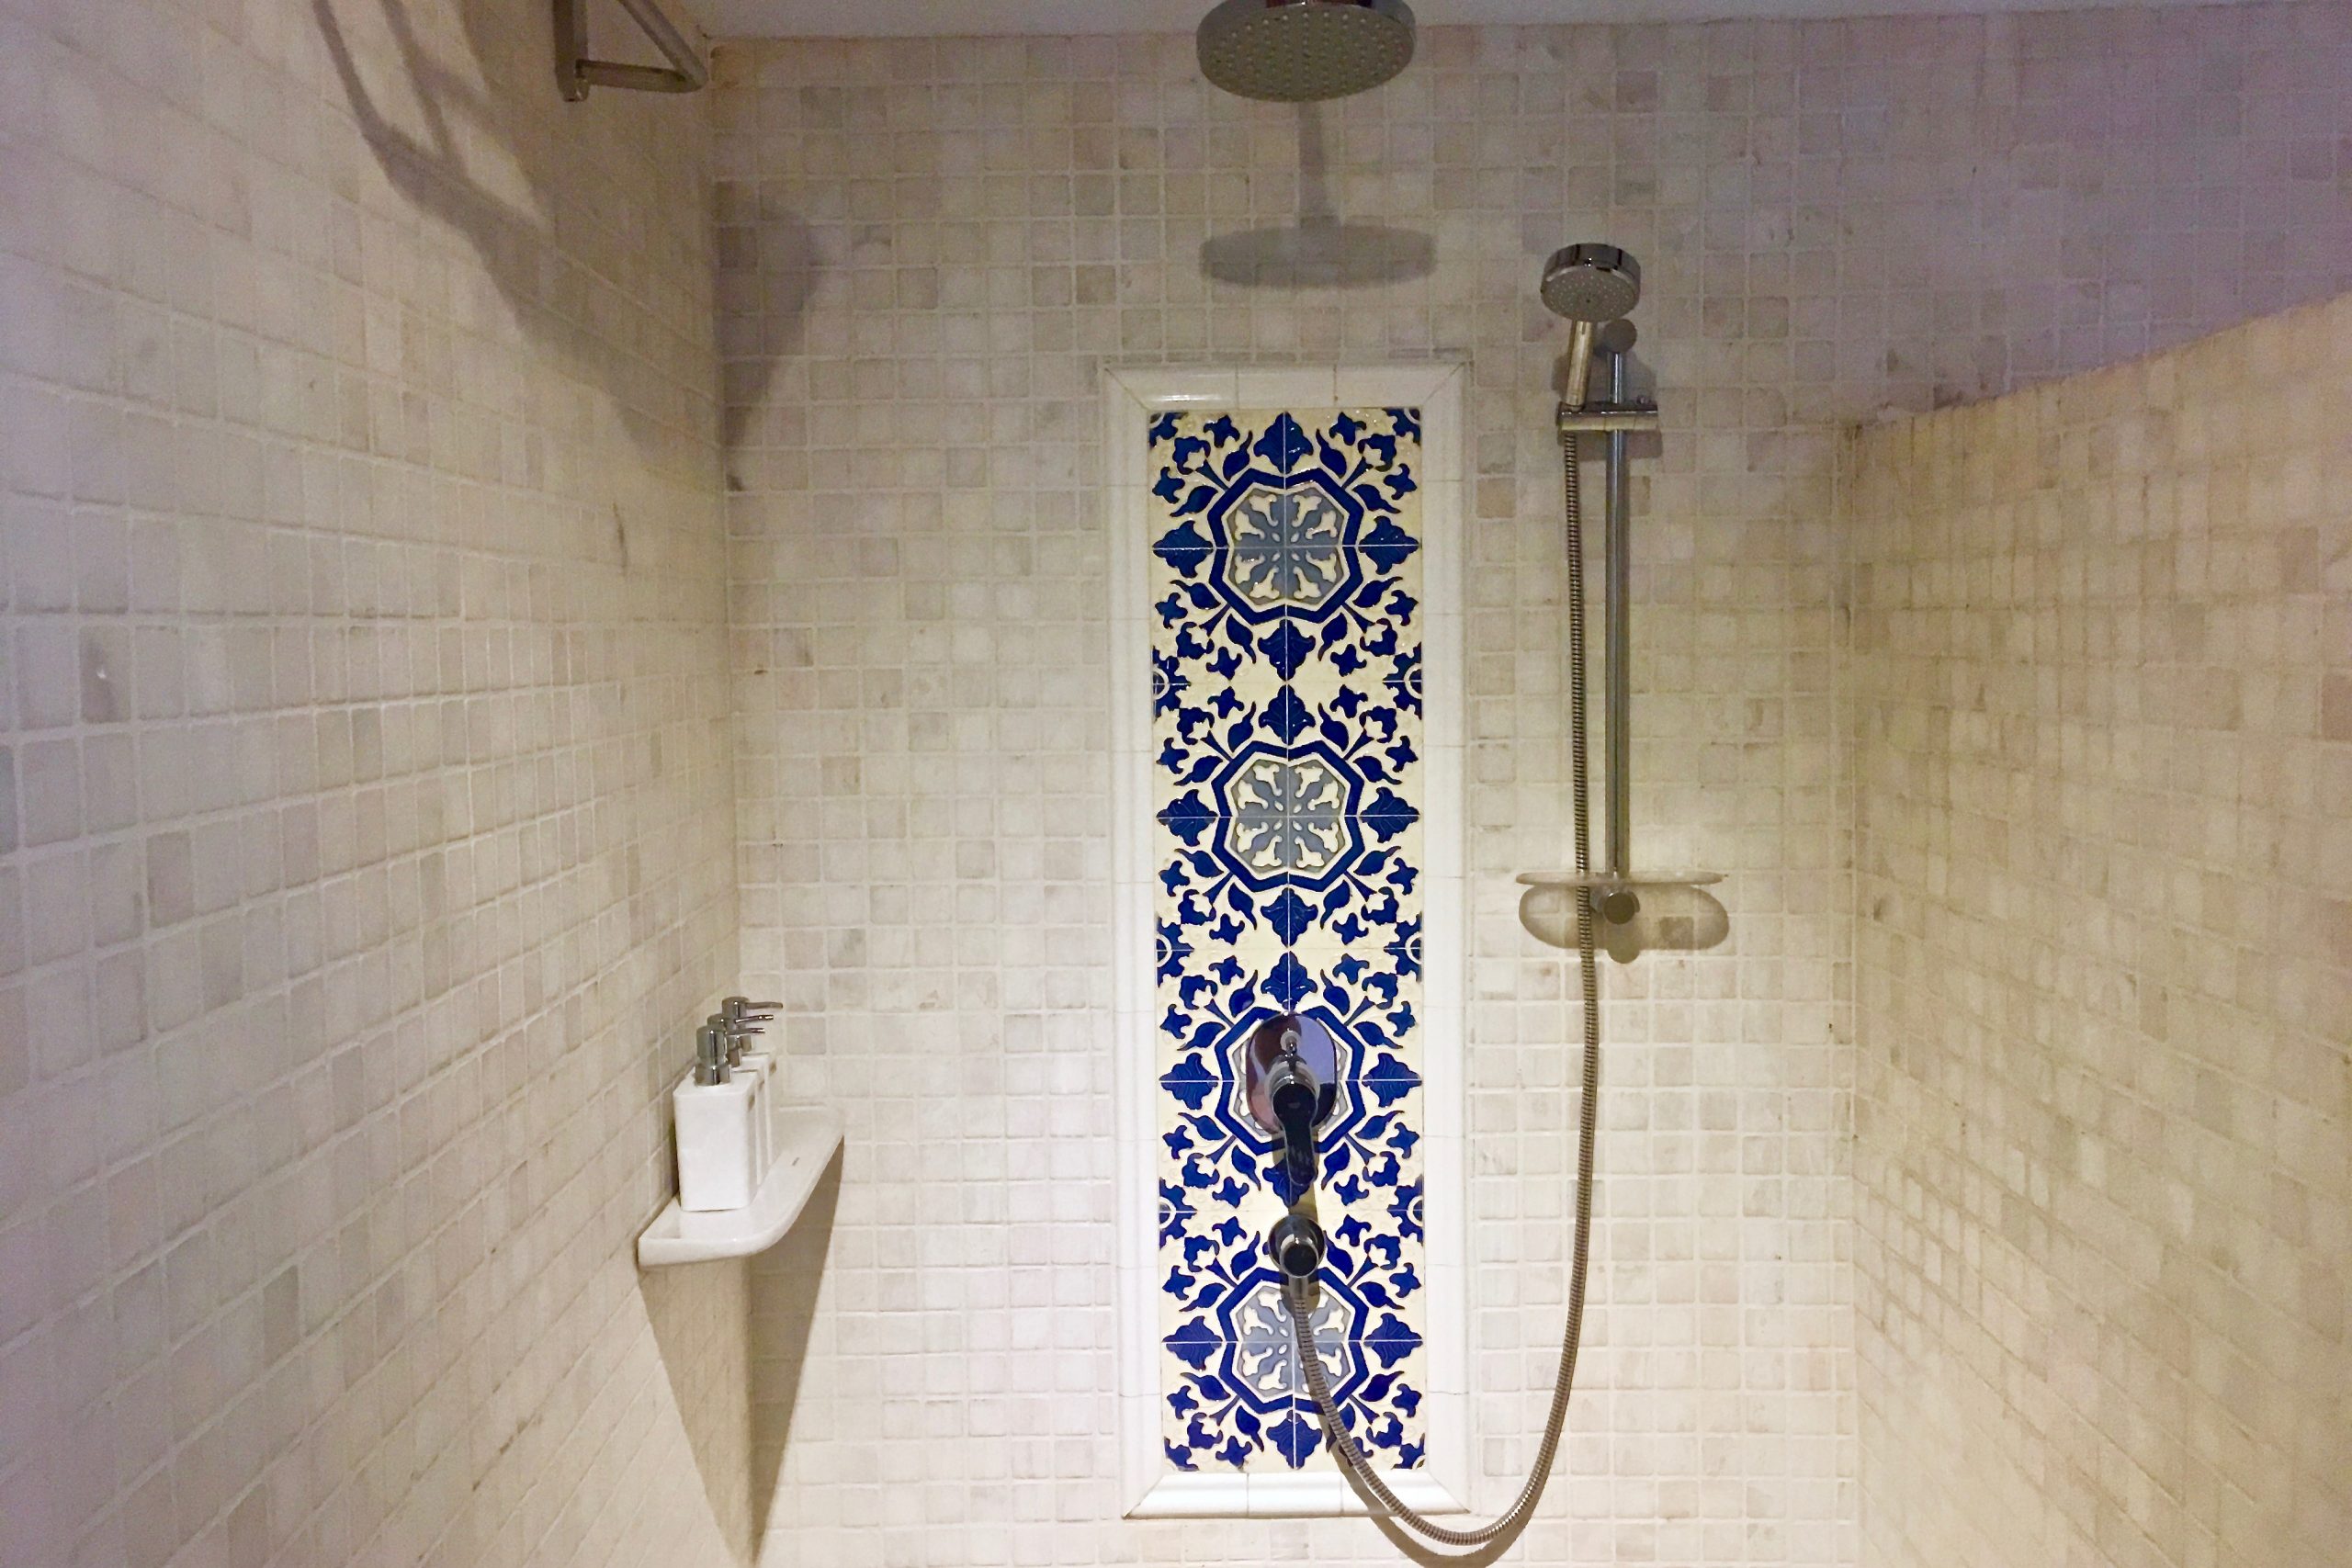 Shower | Mansion Room | Jawi Peranakan Mansion | Food For Thought